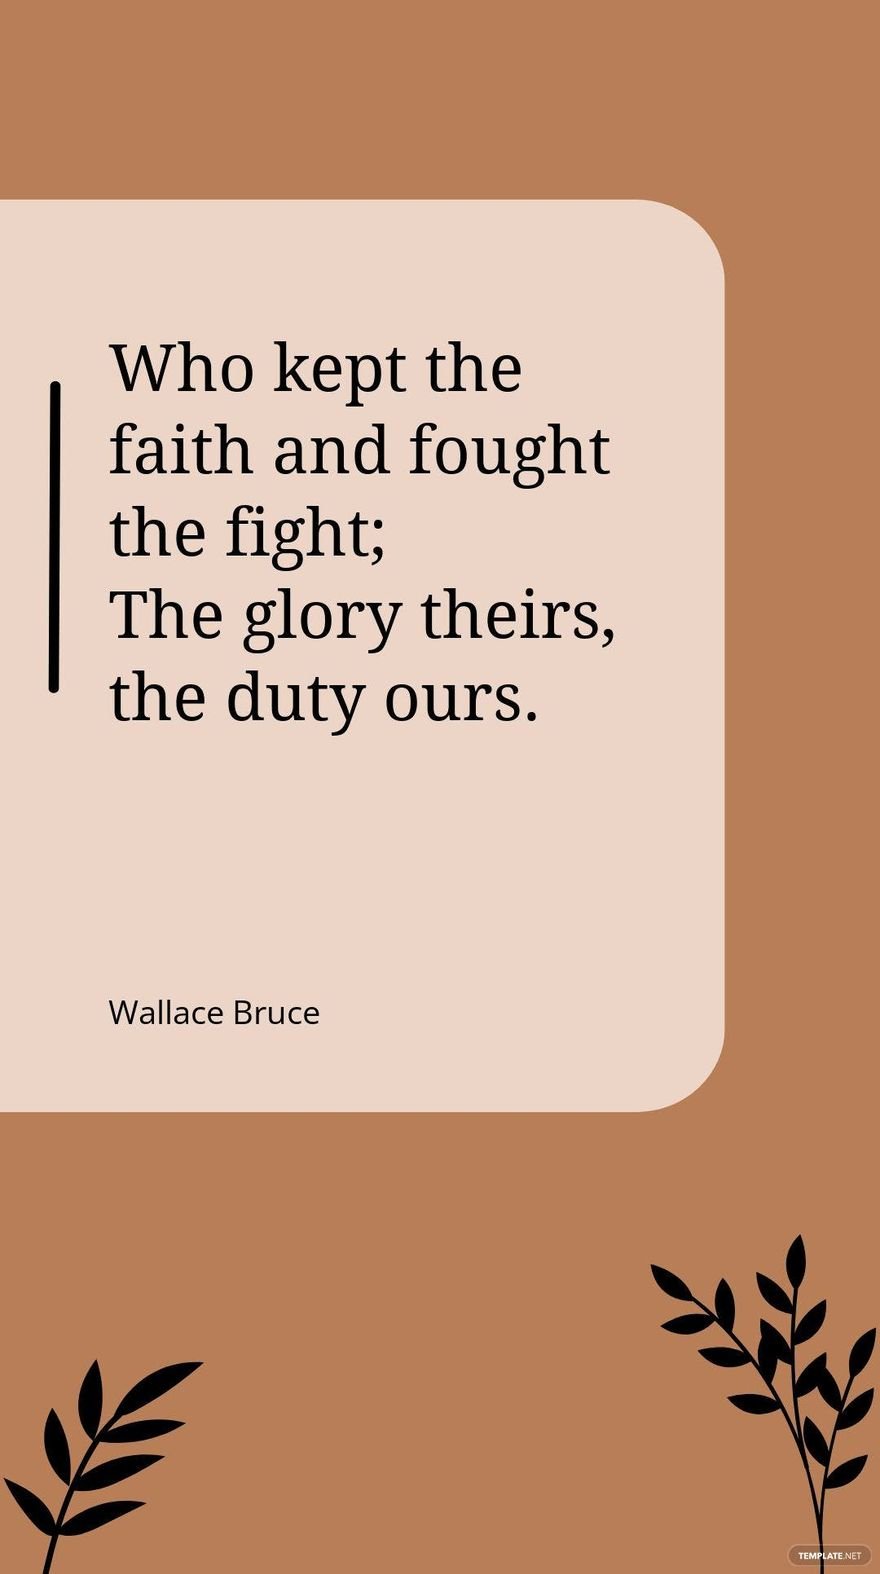 Free Wallace Bruce - "Who kept the faith and fought the fight; The glory theirs, the duty ours.” in JPG